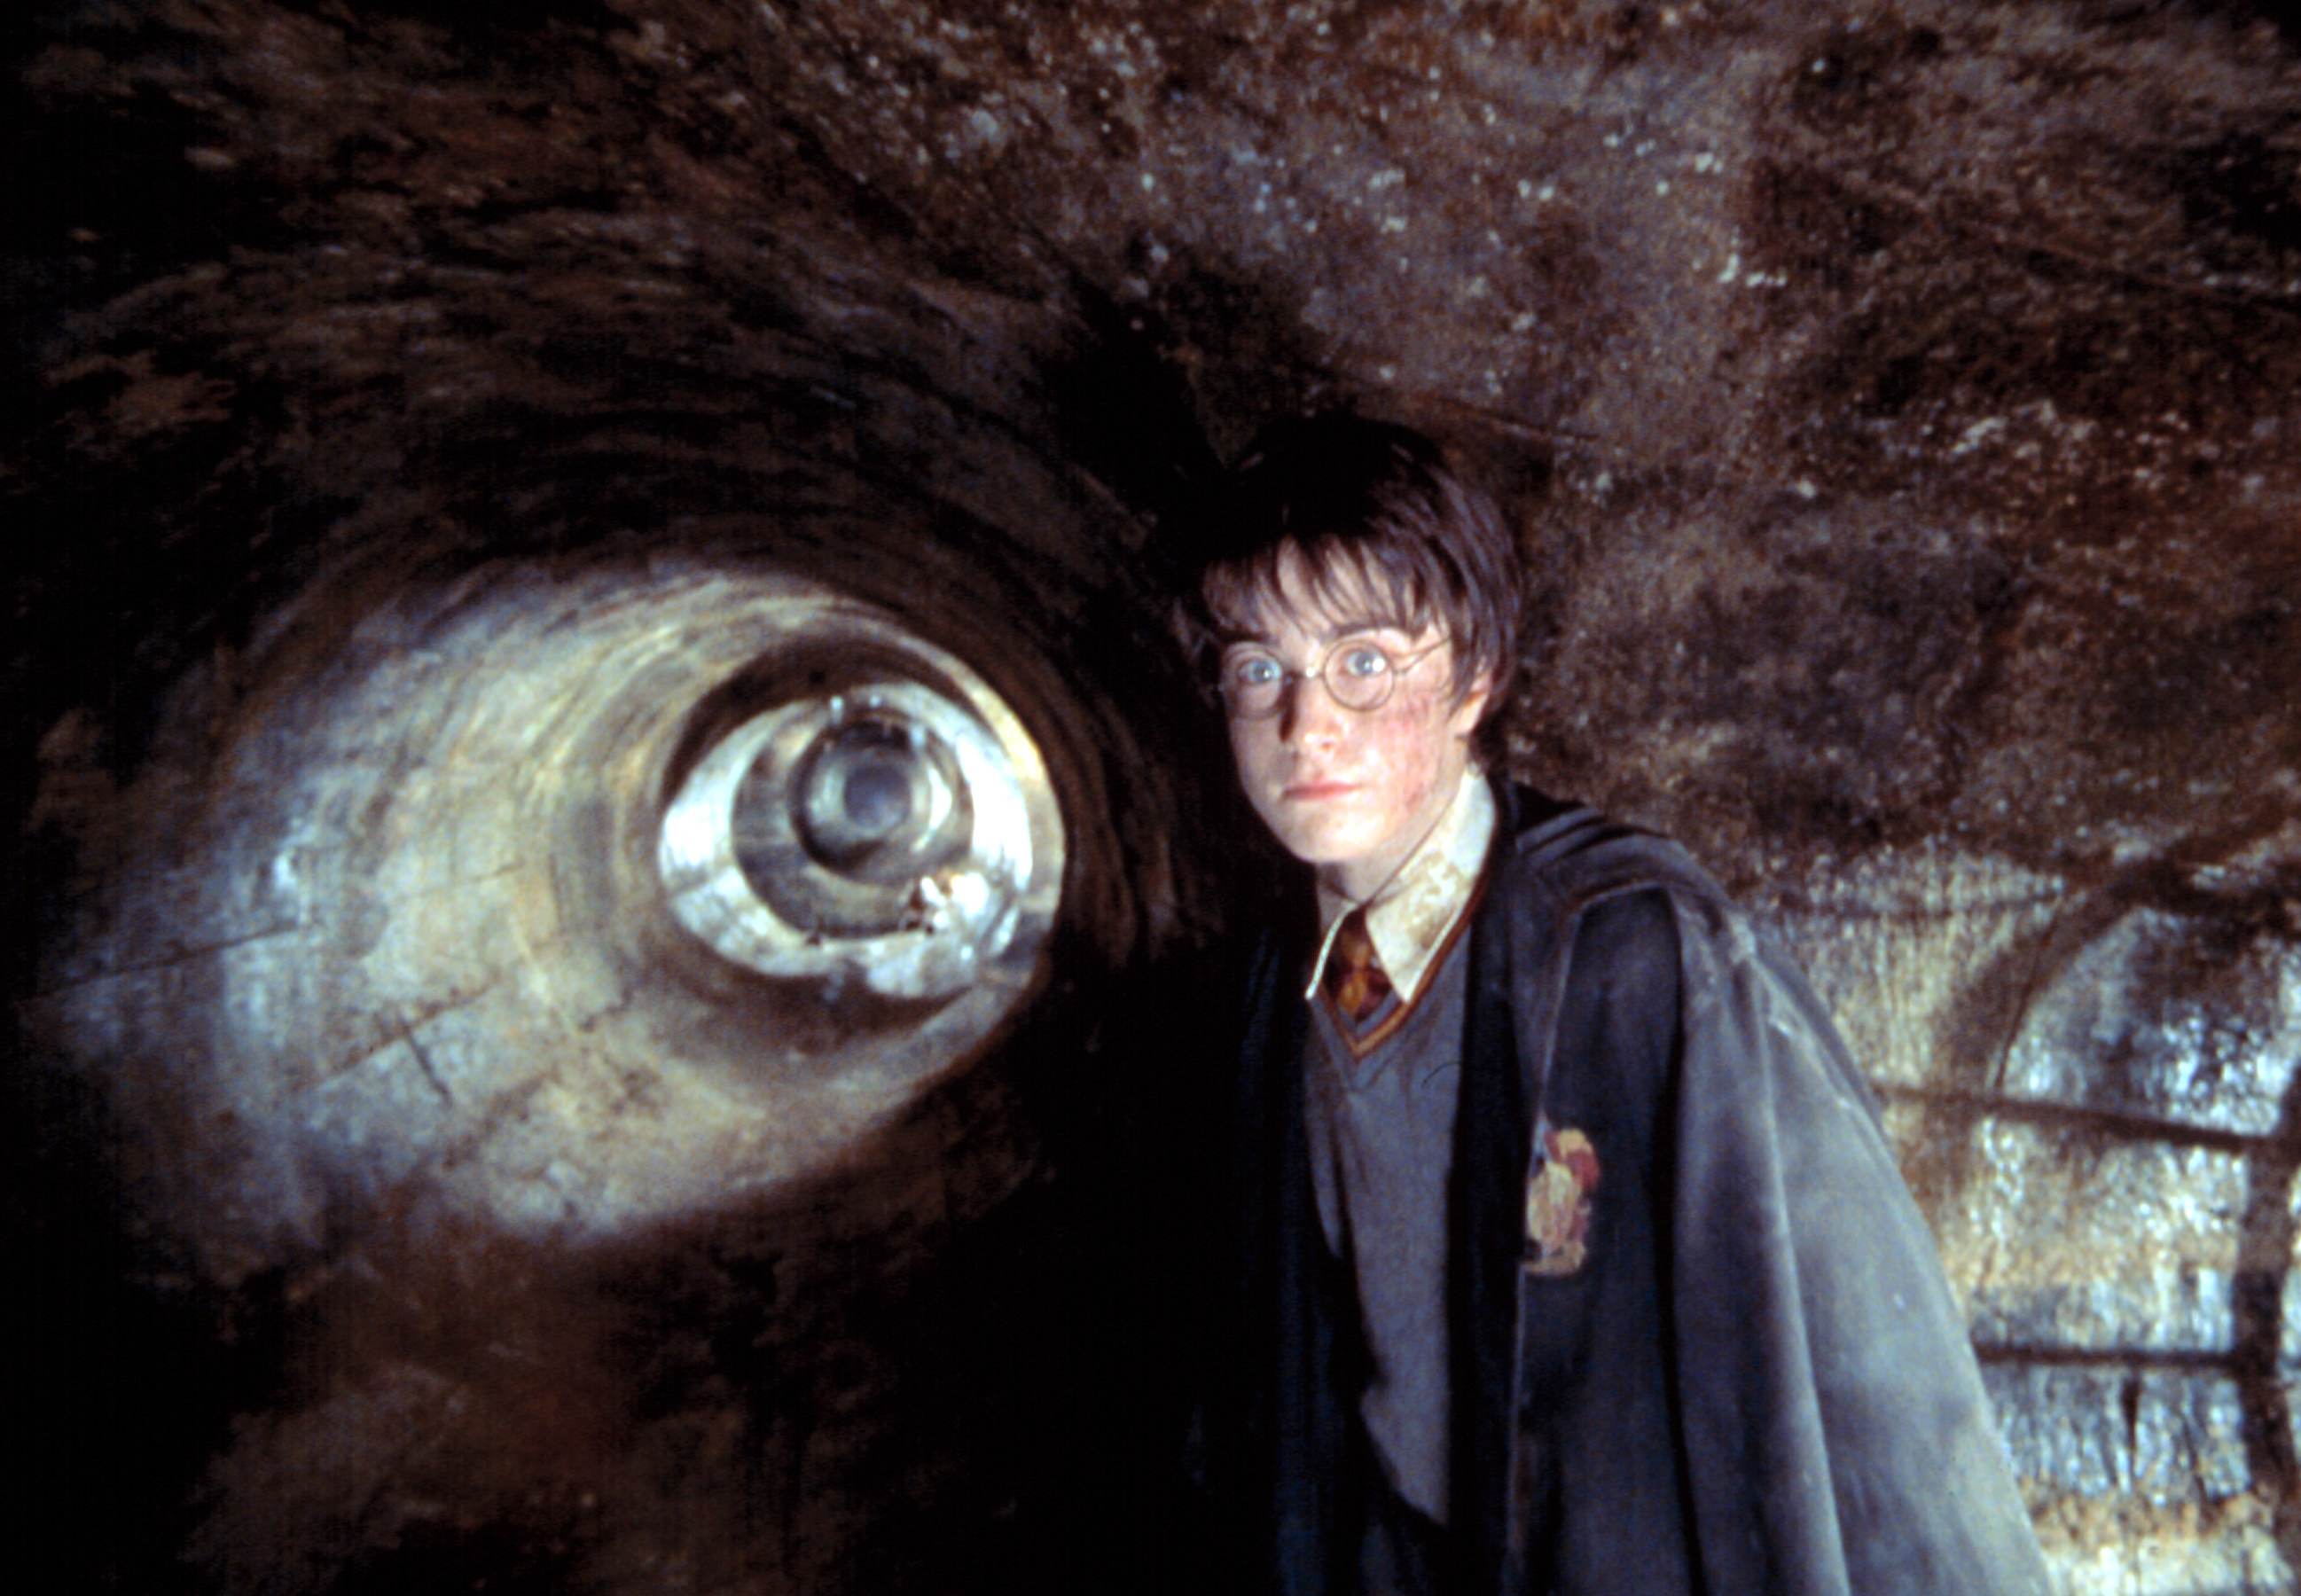 A young man stands in a sewer system, looking at something off-camera